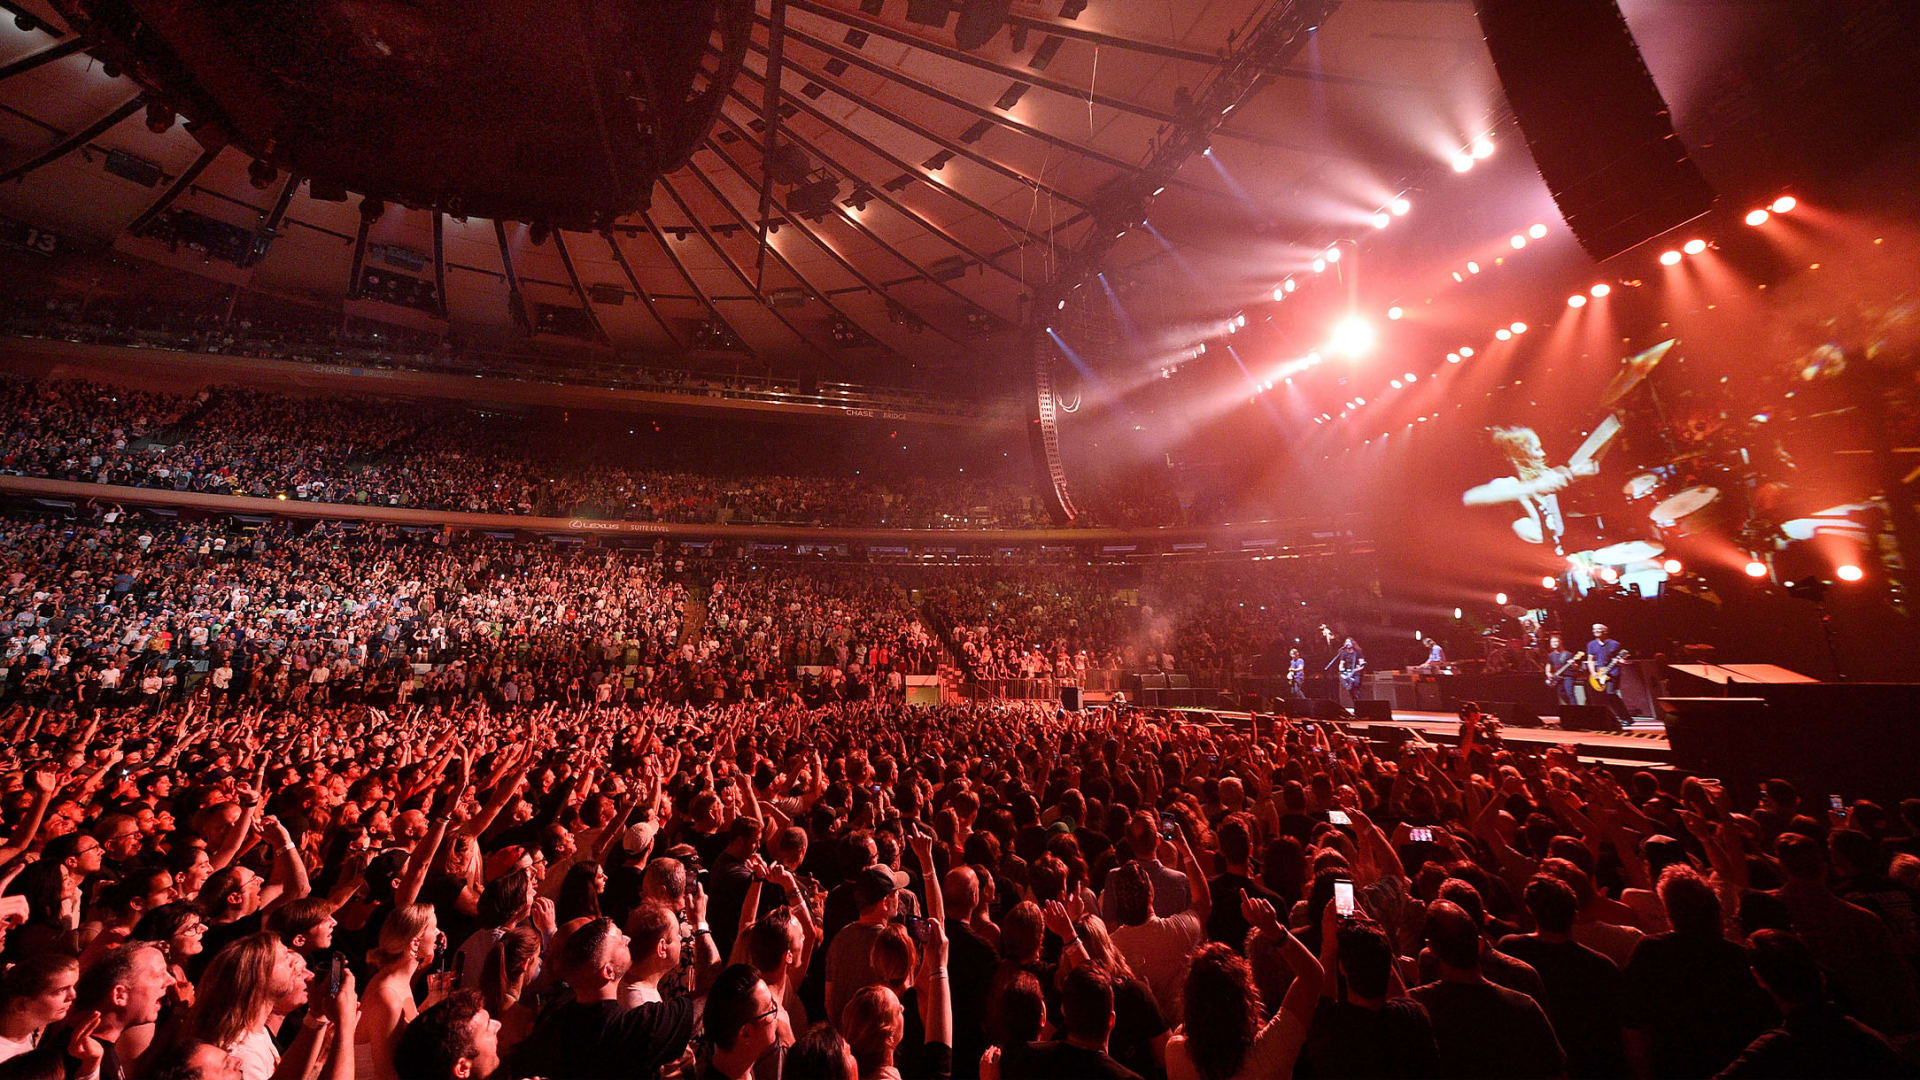 The Foo Fighters reopen Madison Square Garden on June 20, 2021, in New York City. The concert, with all attendees vaccinated, is the first in a New York arena to be held at full capacity since March 2020, when the pandemic led to the closure of live performance venues.